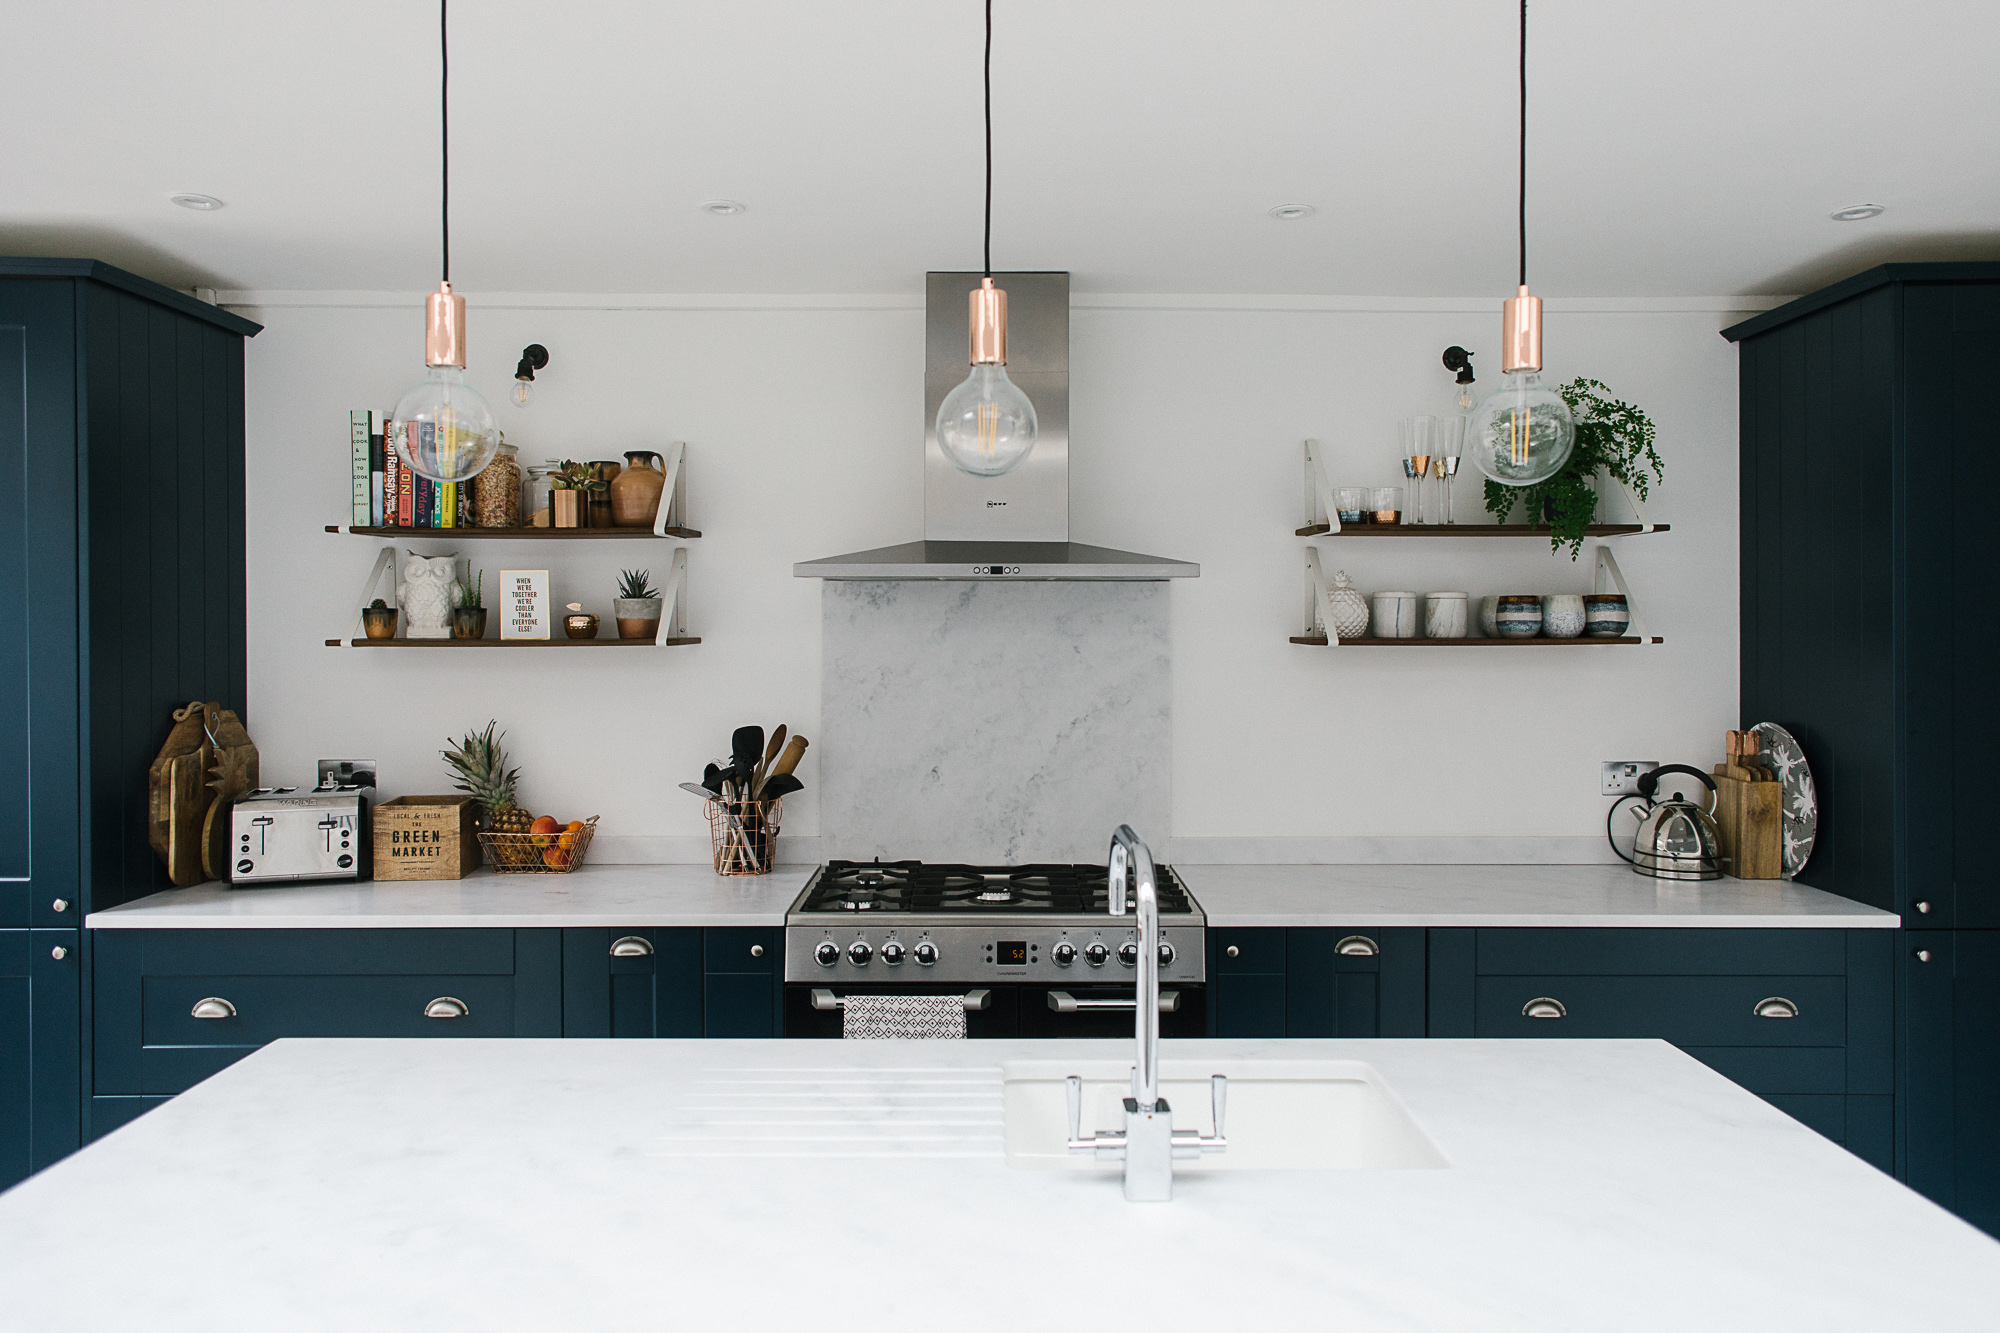 Plastic free swaps - Image of marble topped kitchen with grey cabinets and feature lighting